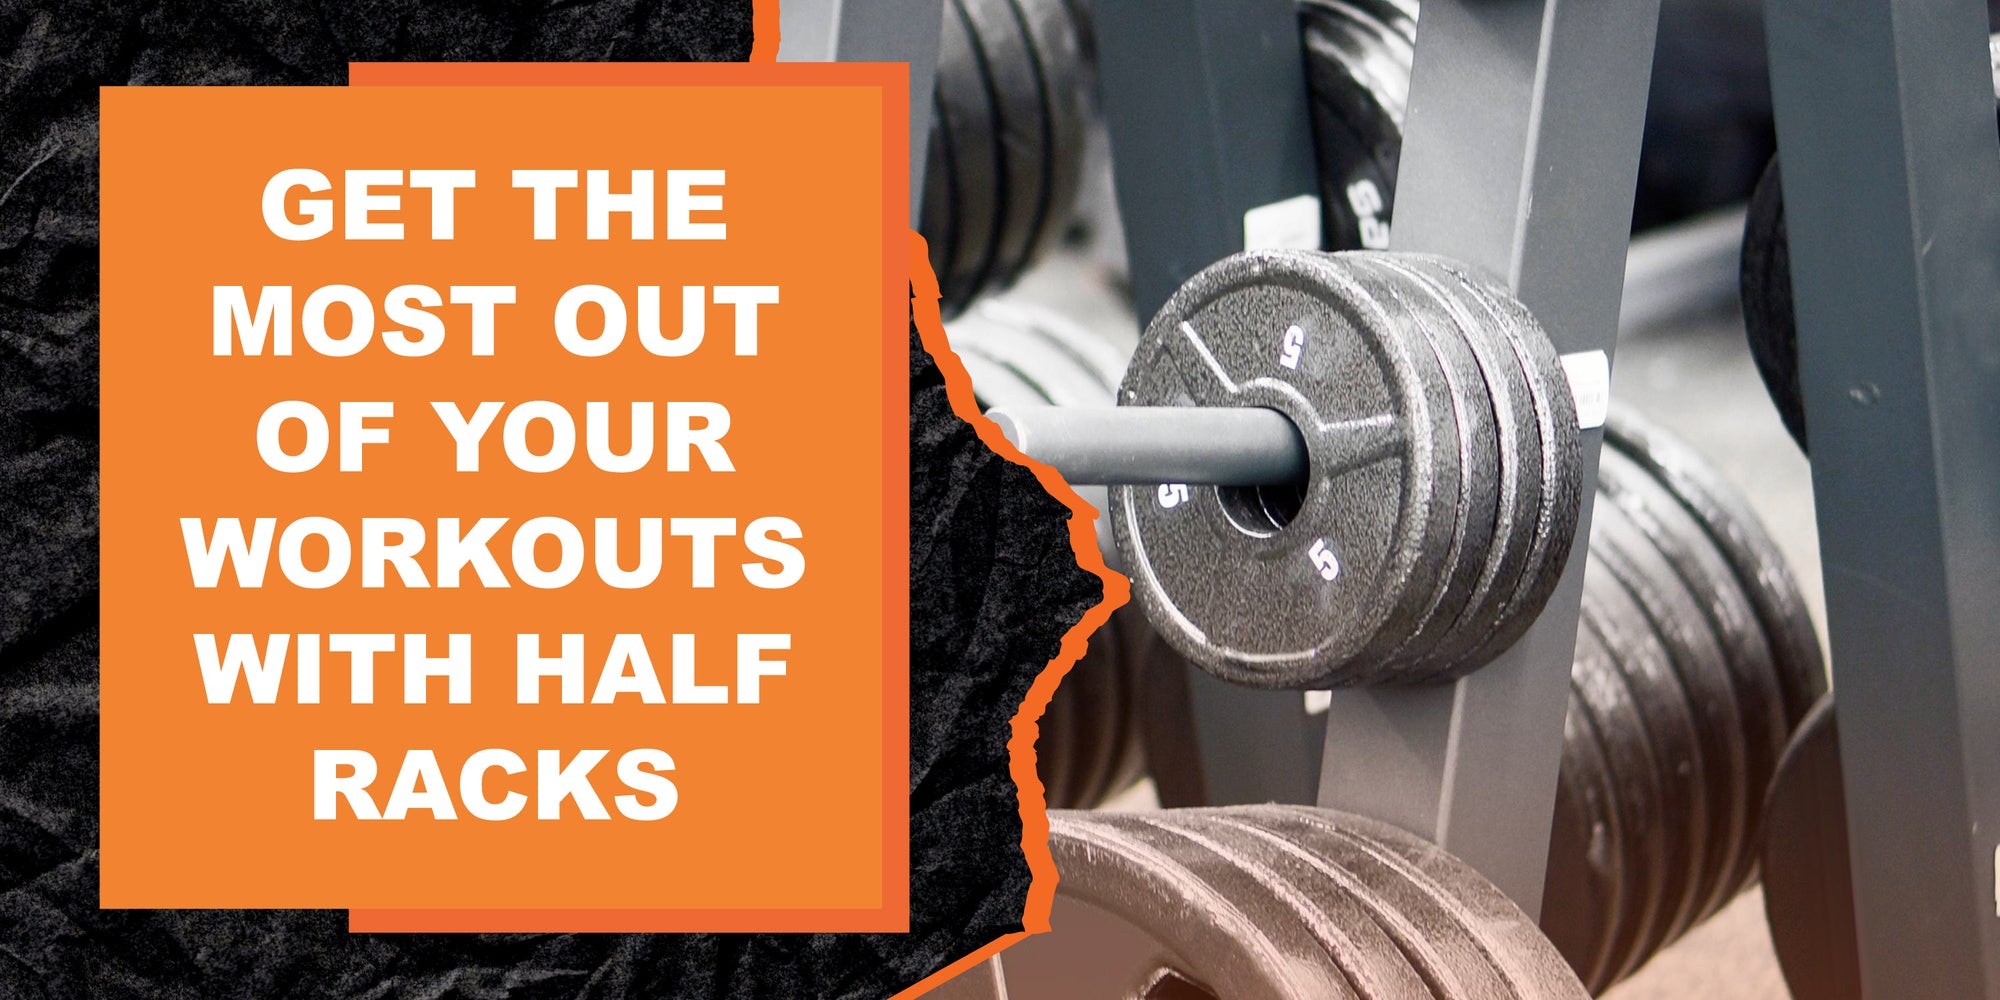 Get the Most Out of Your Workouts with Half Racks